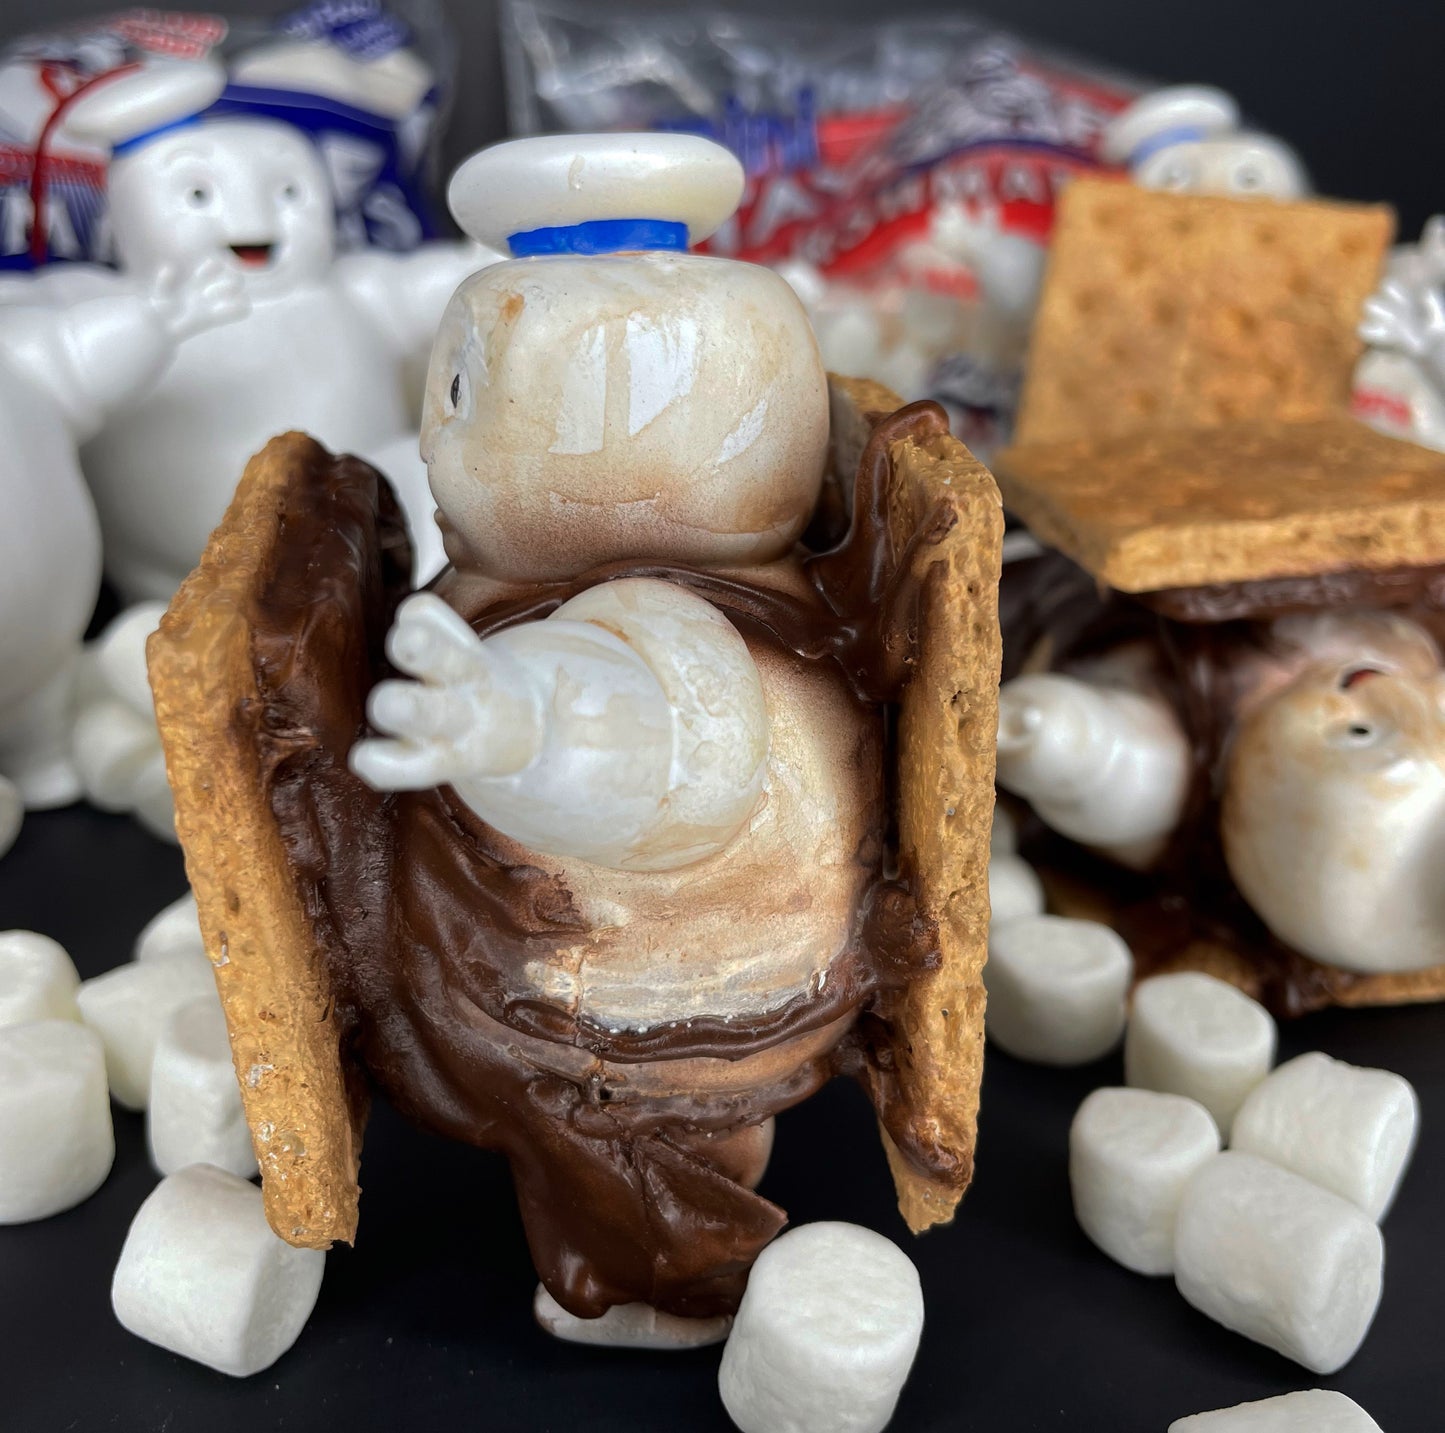 S'mores Puft